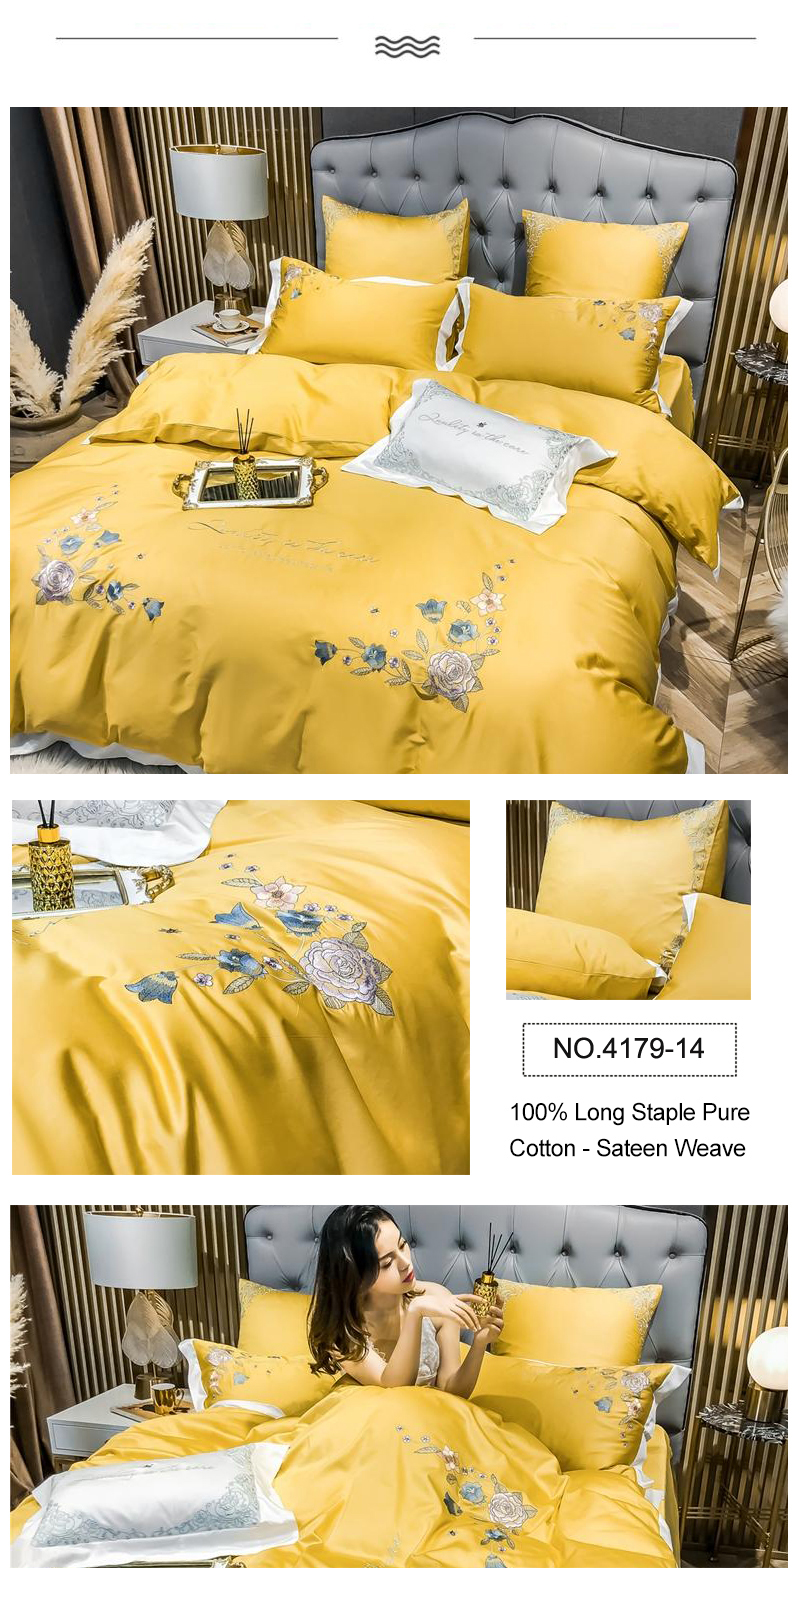 With LOGO Bed Sheets 100% Silk